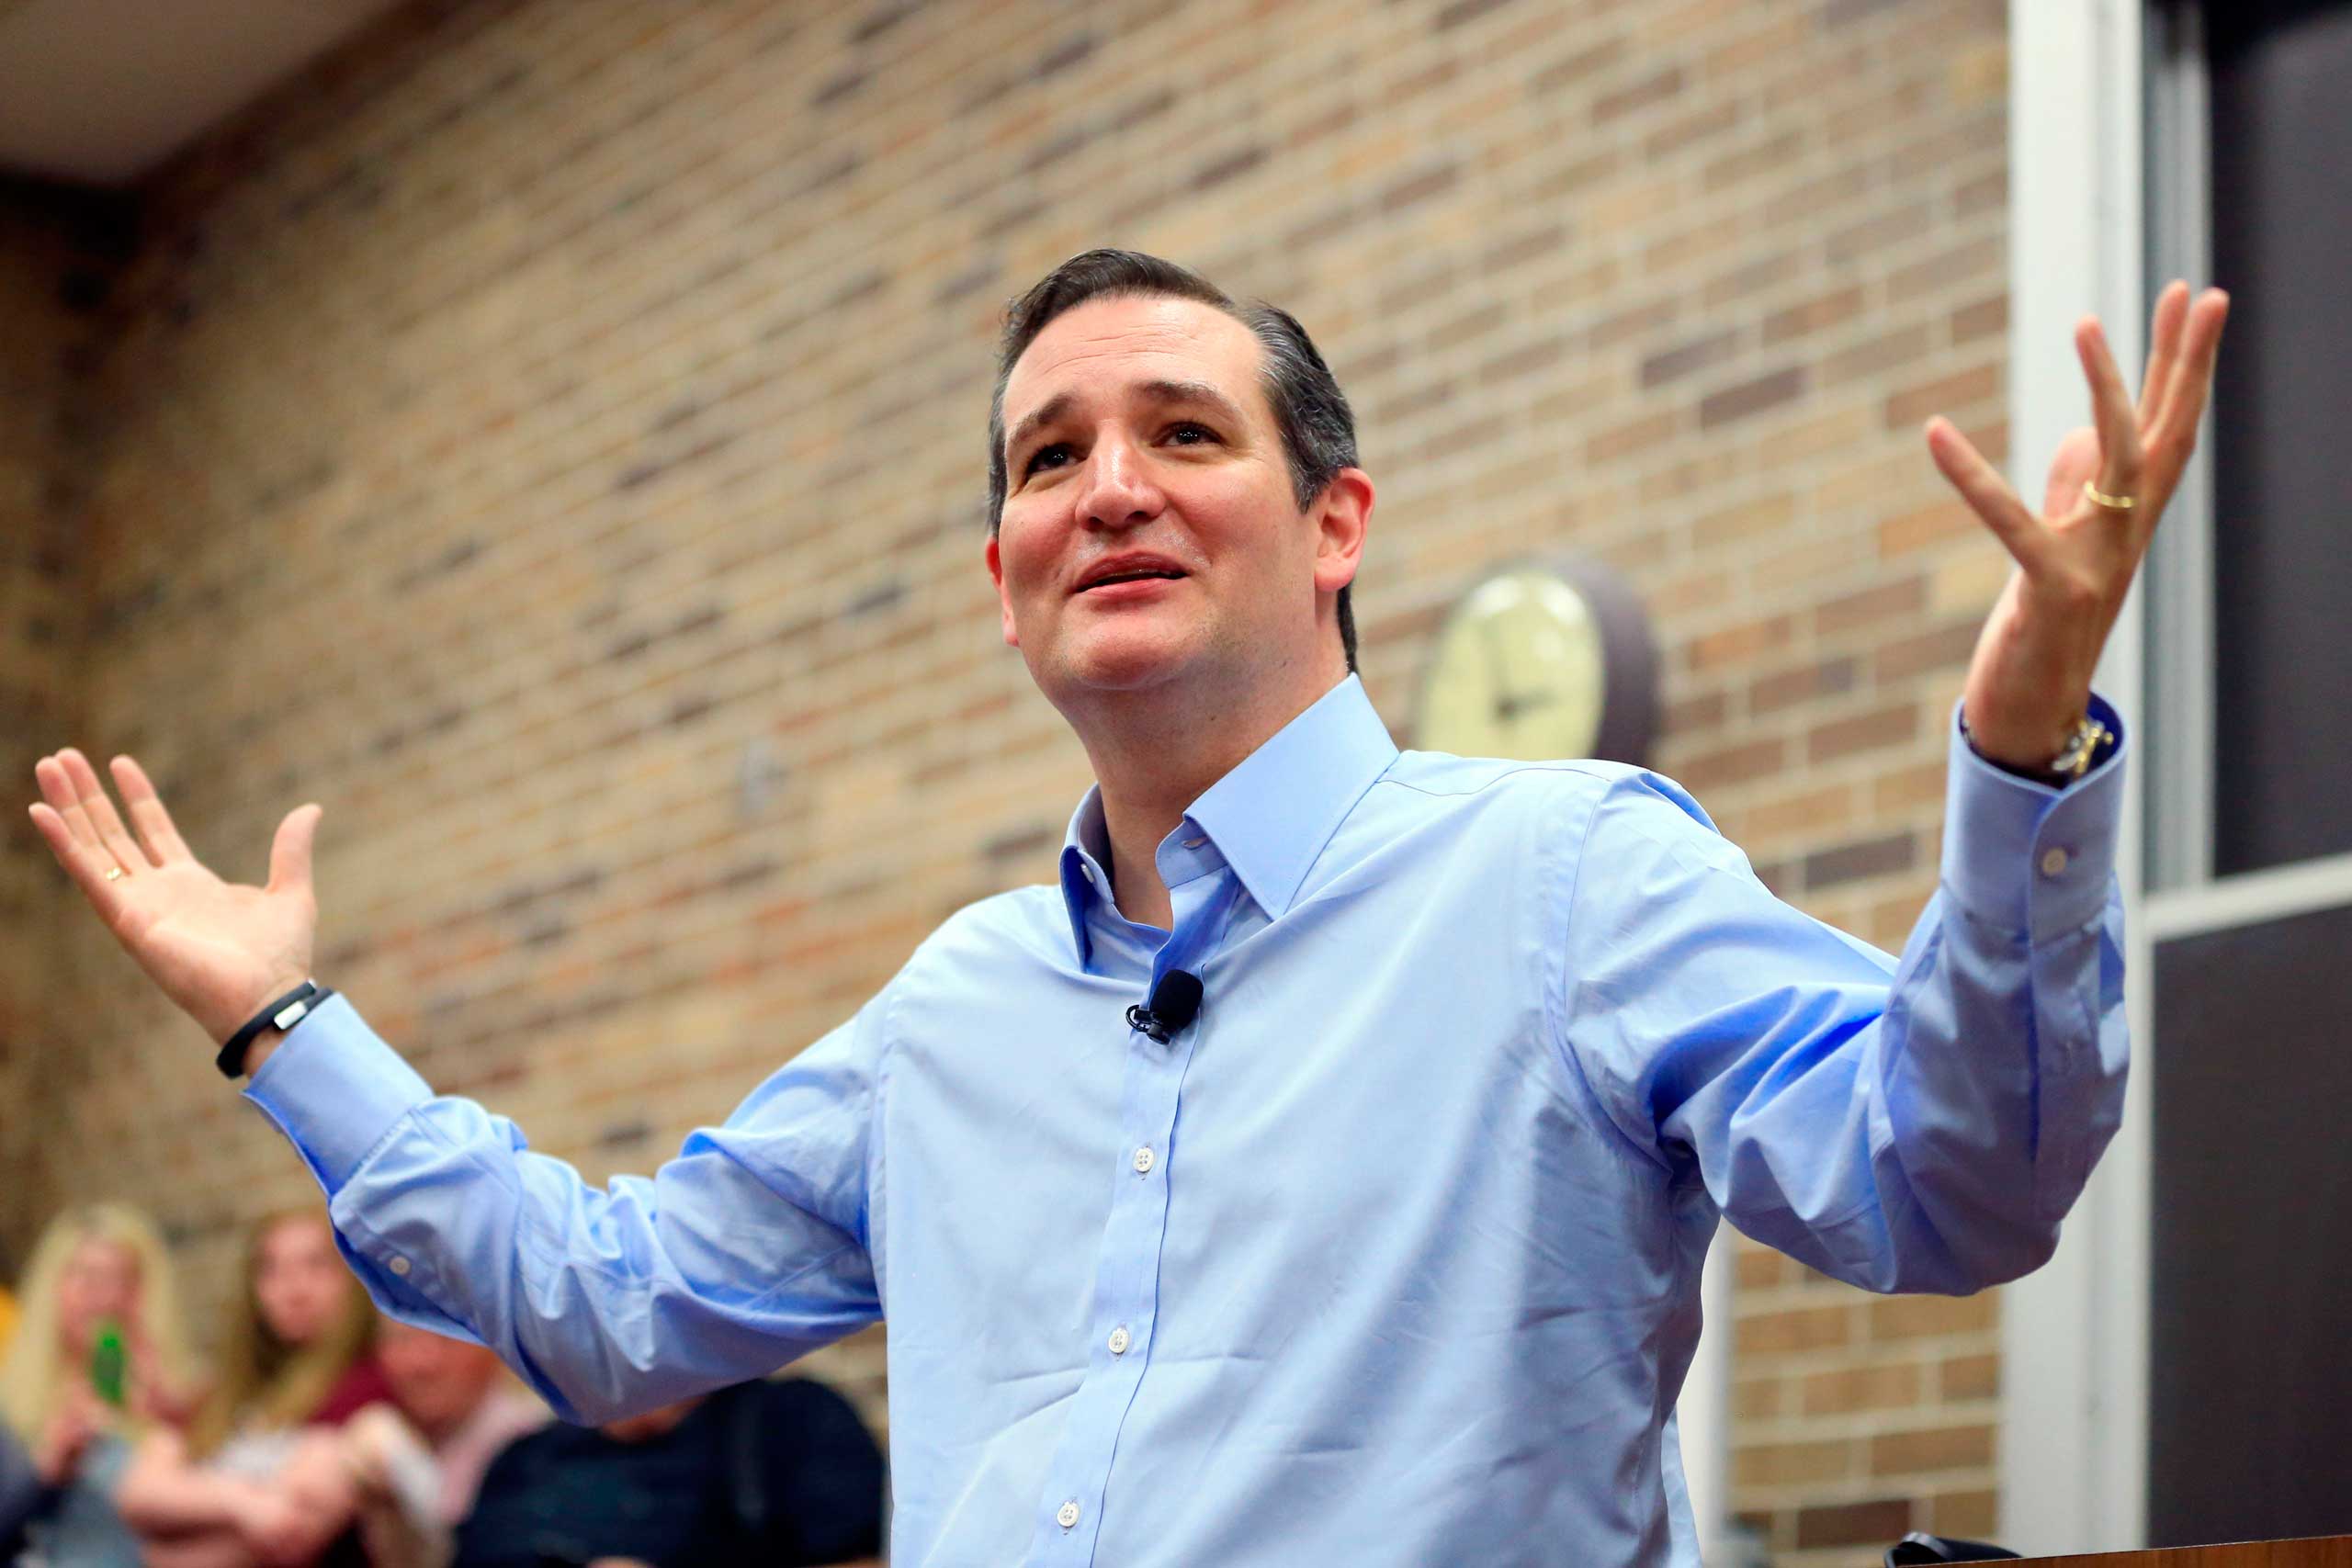 Republican presidential candidate Sen. Ted Cruz, R-Texas, speaks during a town hall event at Morningside College in Sioux City, Iowa on April 1, 2015.